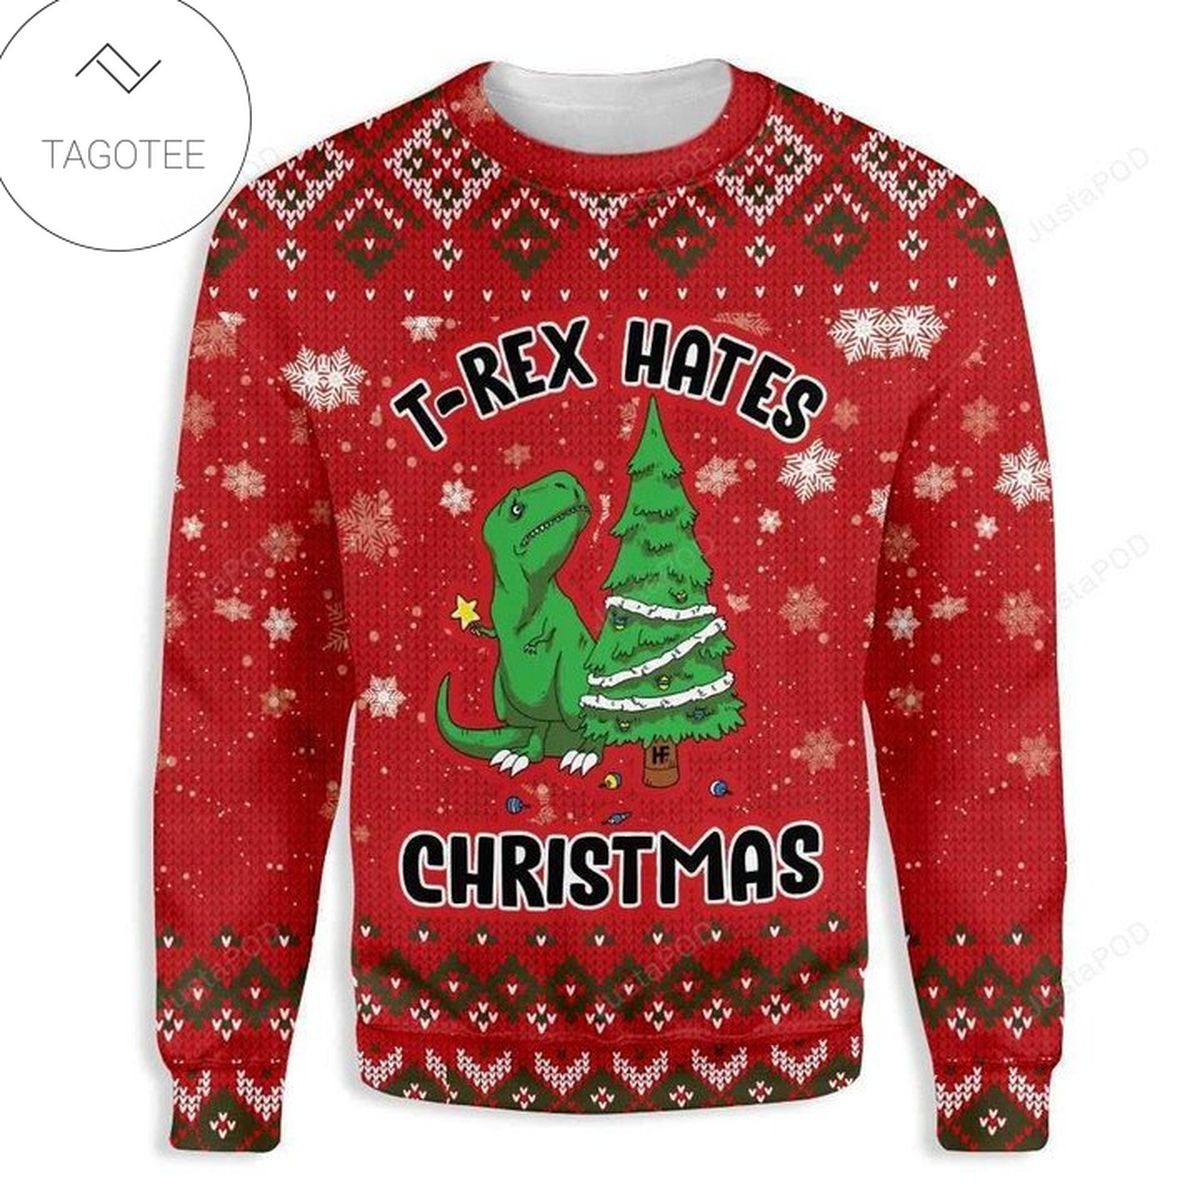 T-Rex Hates Christmas Ugly Christmas Sweater